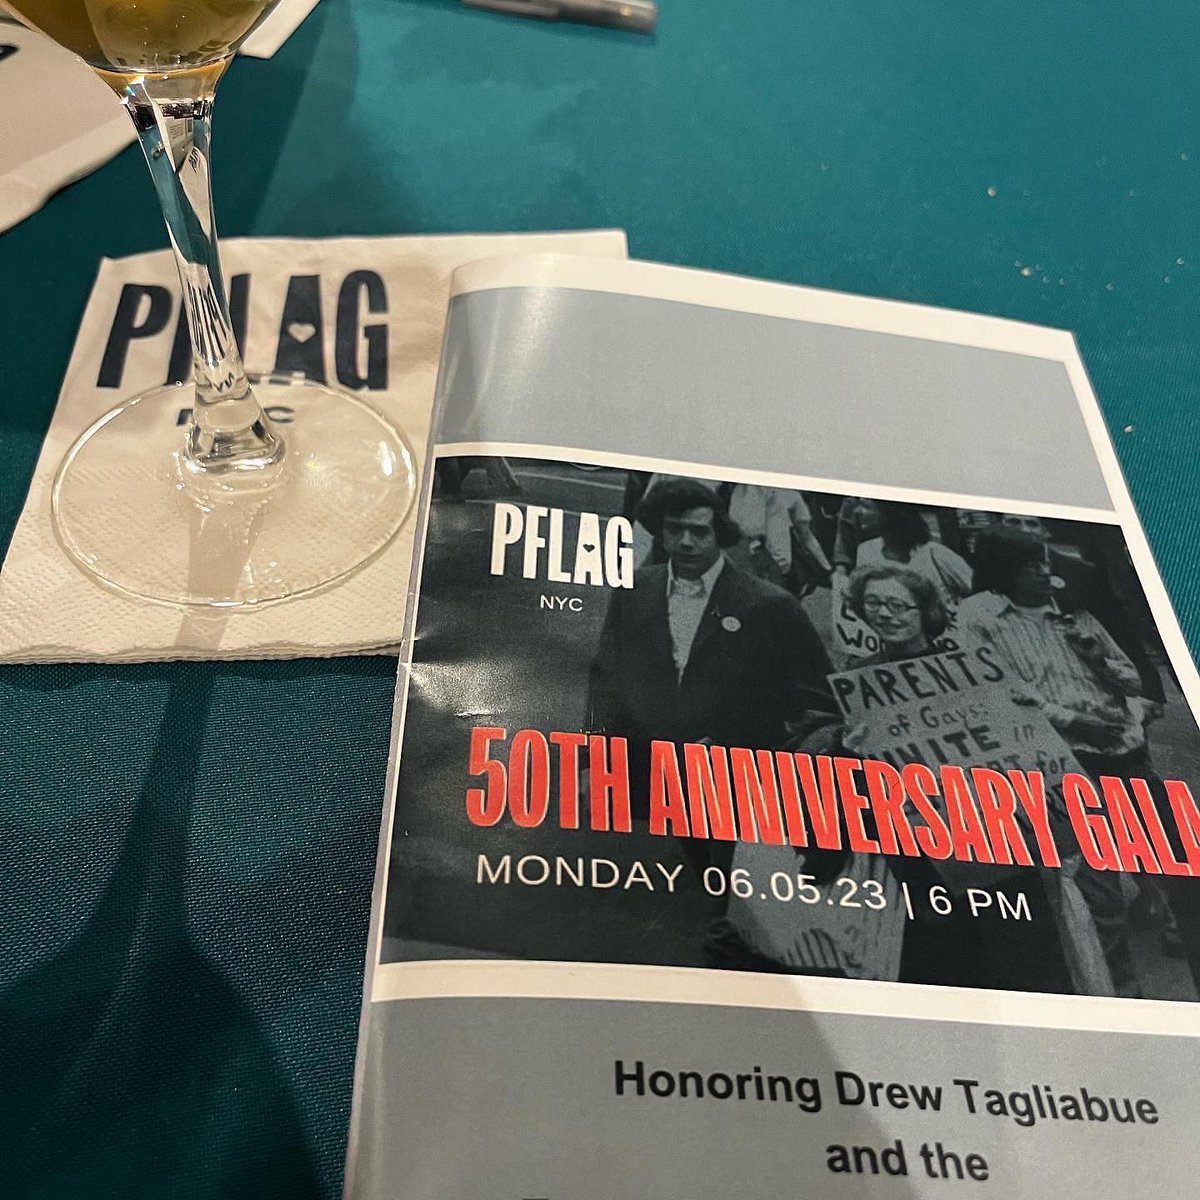 The firm wishes PFLAG Happy 50th Anniversary! 

We were there to show love and support for this organization for its tireless efforts in supporting the LGBTQ community including parents and families and especially youth of the community.
Happy #pridemonth! 🏳️‍🌈

#PFLAGProud